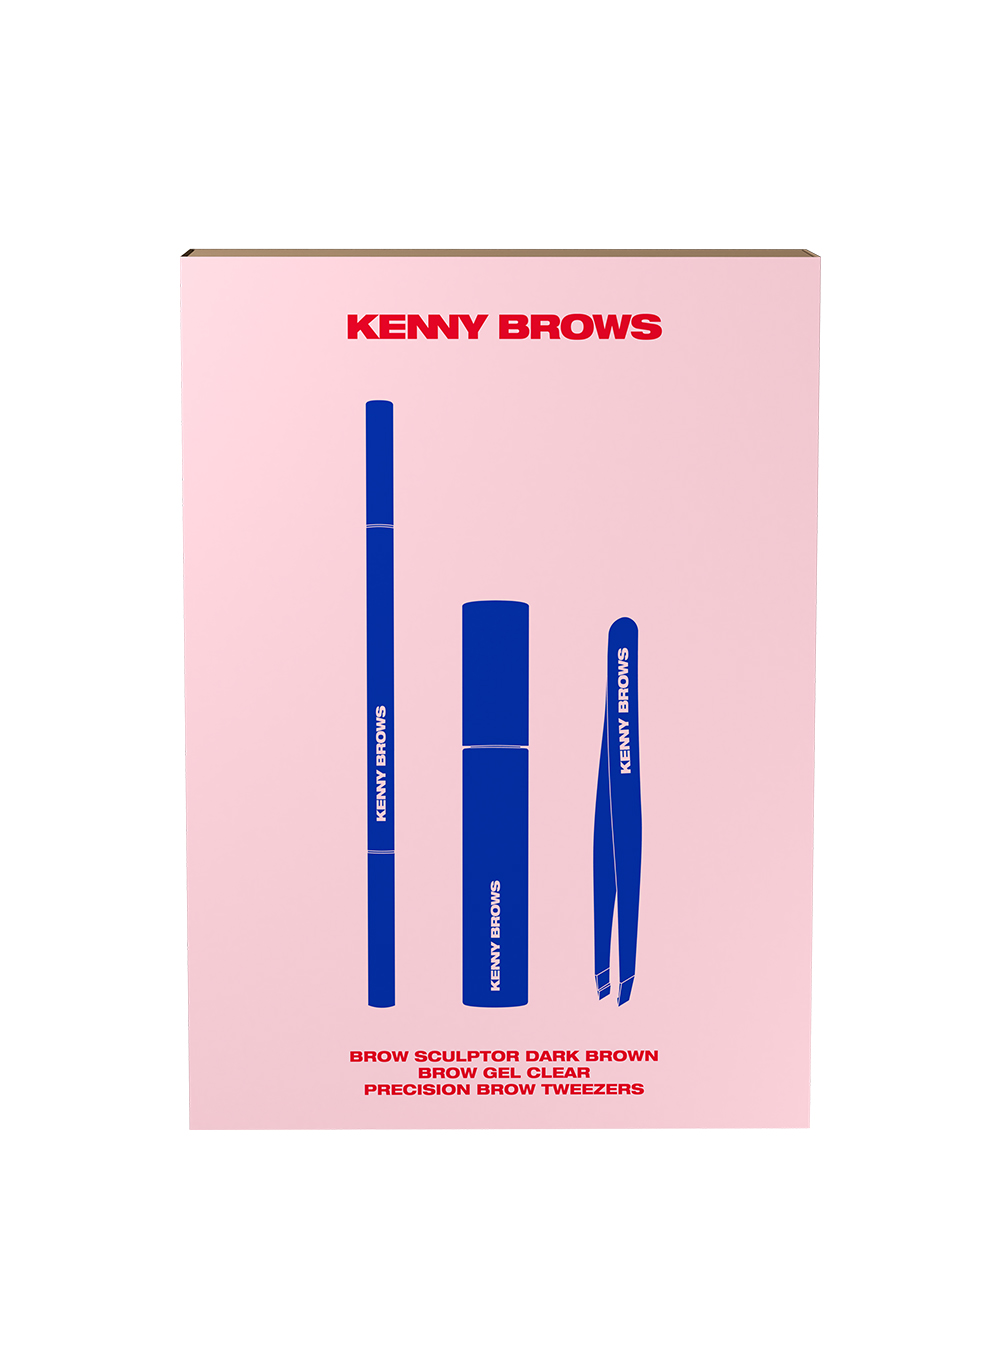 KENNY BROWS Signature Brows Kit